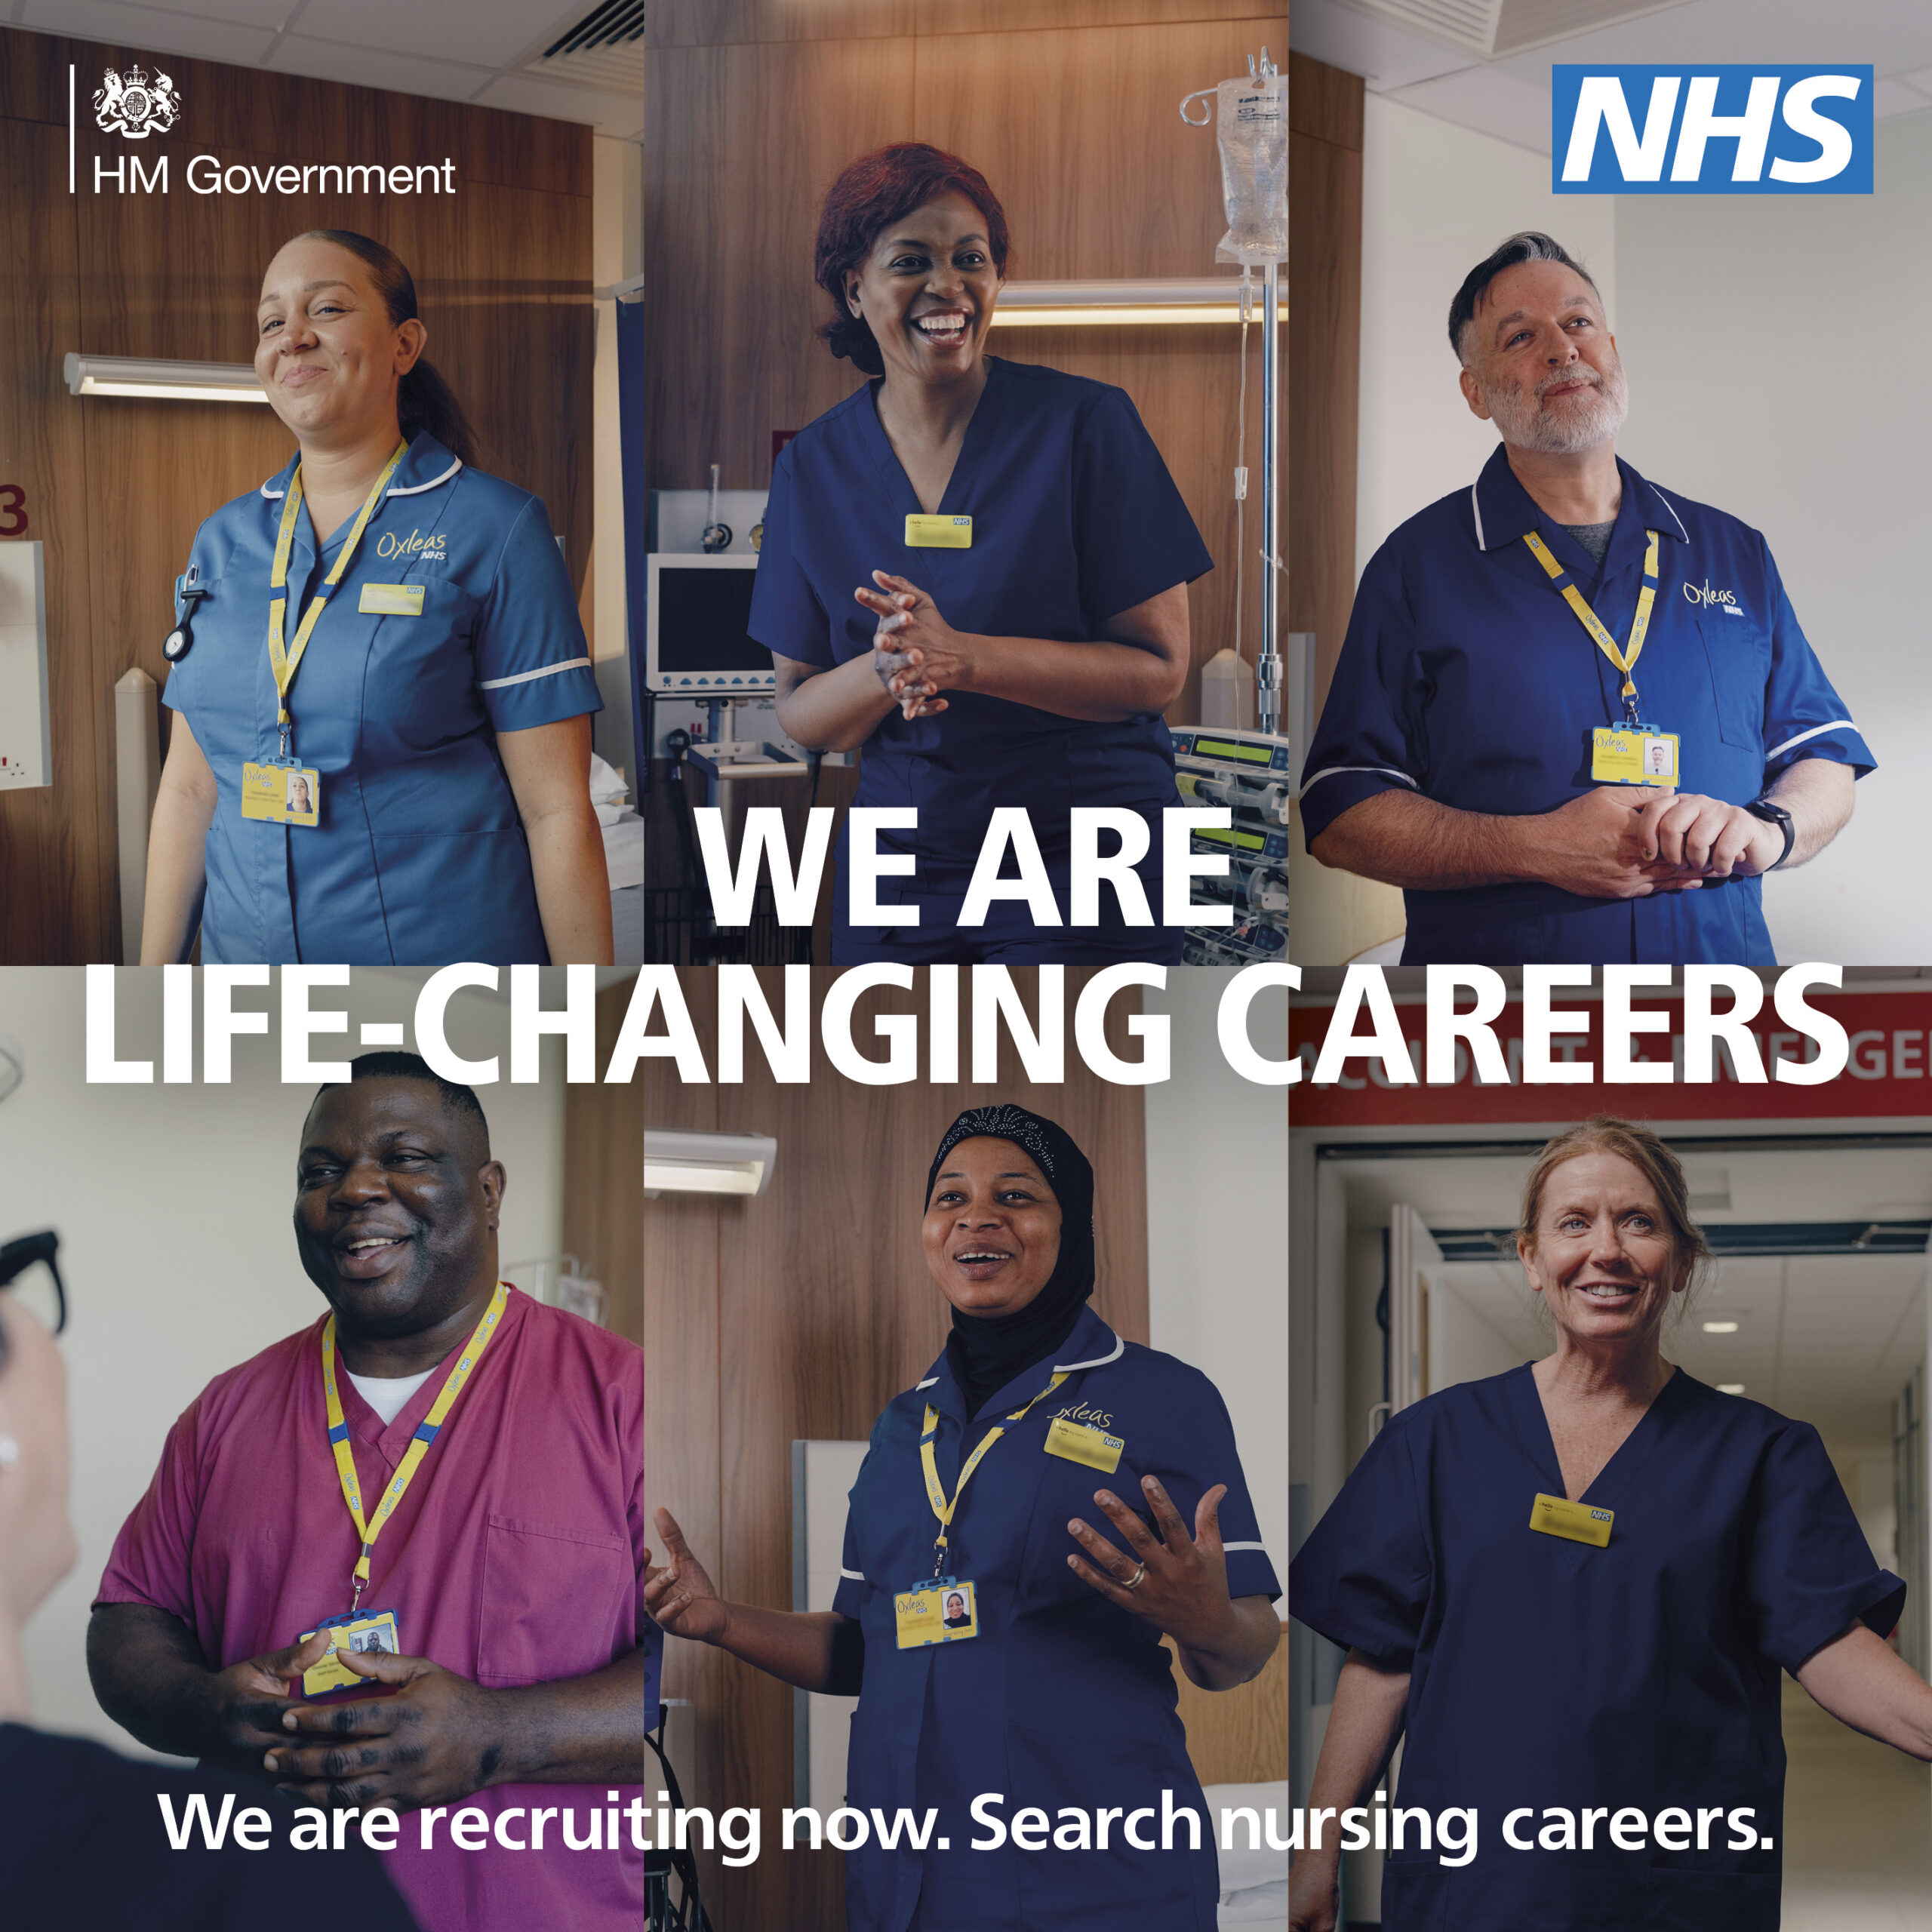 NEW NHS RECRUITMENT CAMPAIGN LAUNCHES TO ENCOURAGE BLACK COMMUNITY TO CONSIDER NURSING CAREER